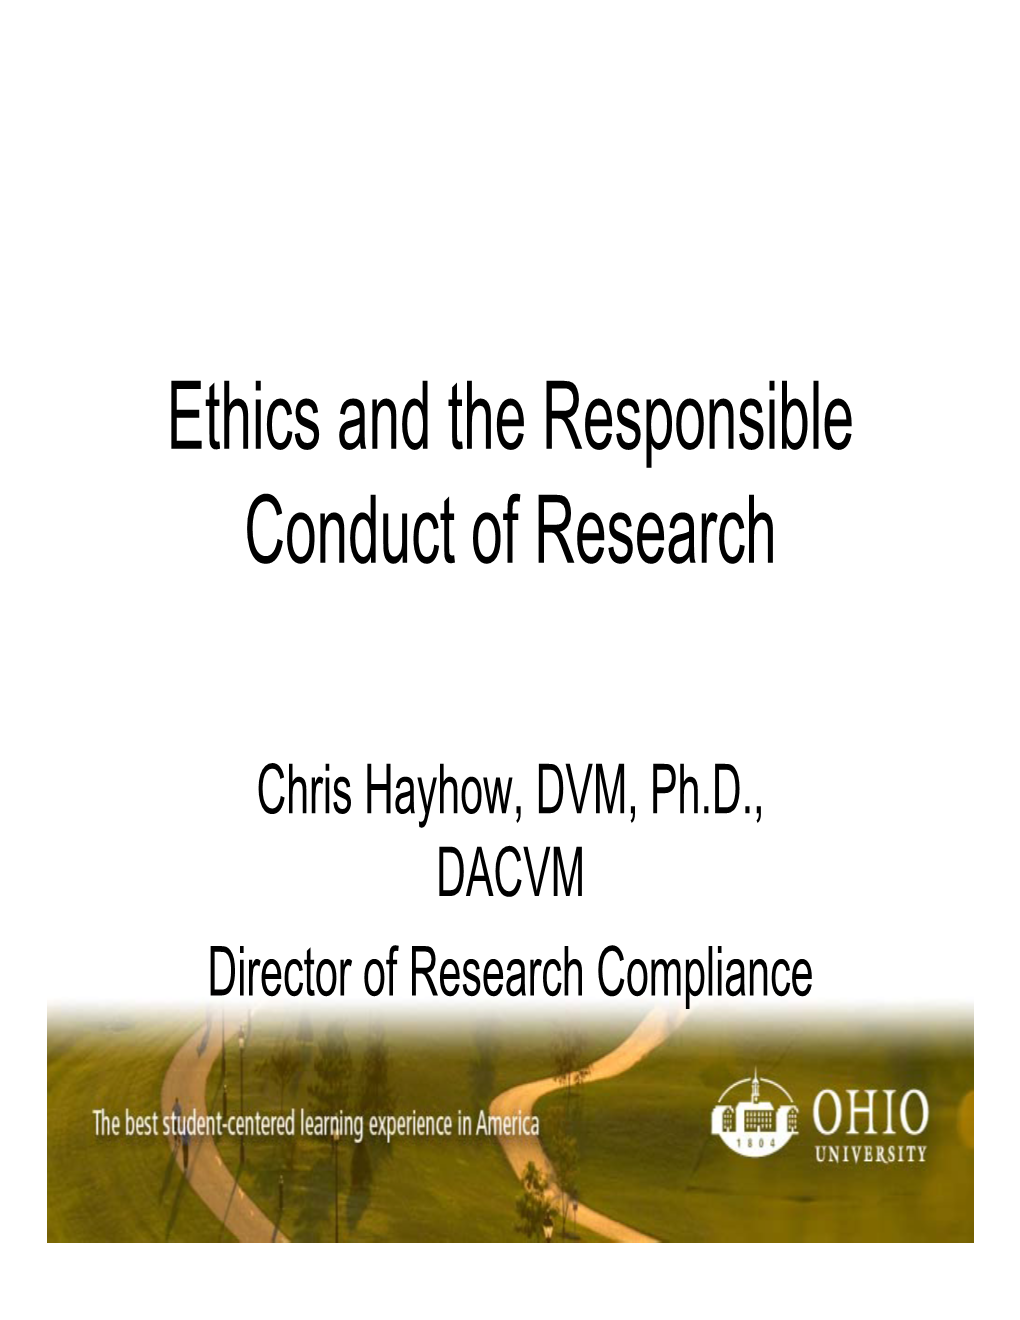 Information About Ethics and the Responsible Conduct of Research